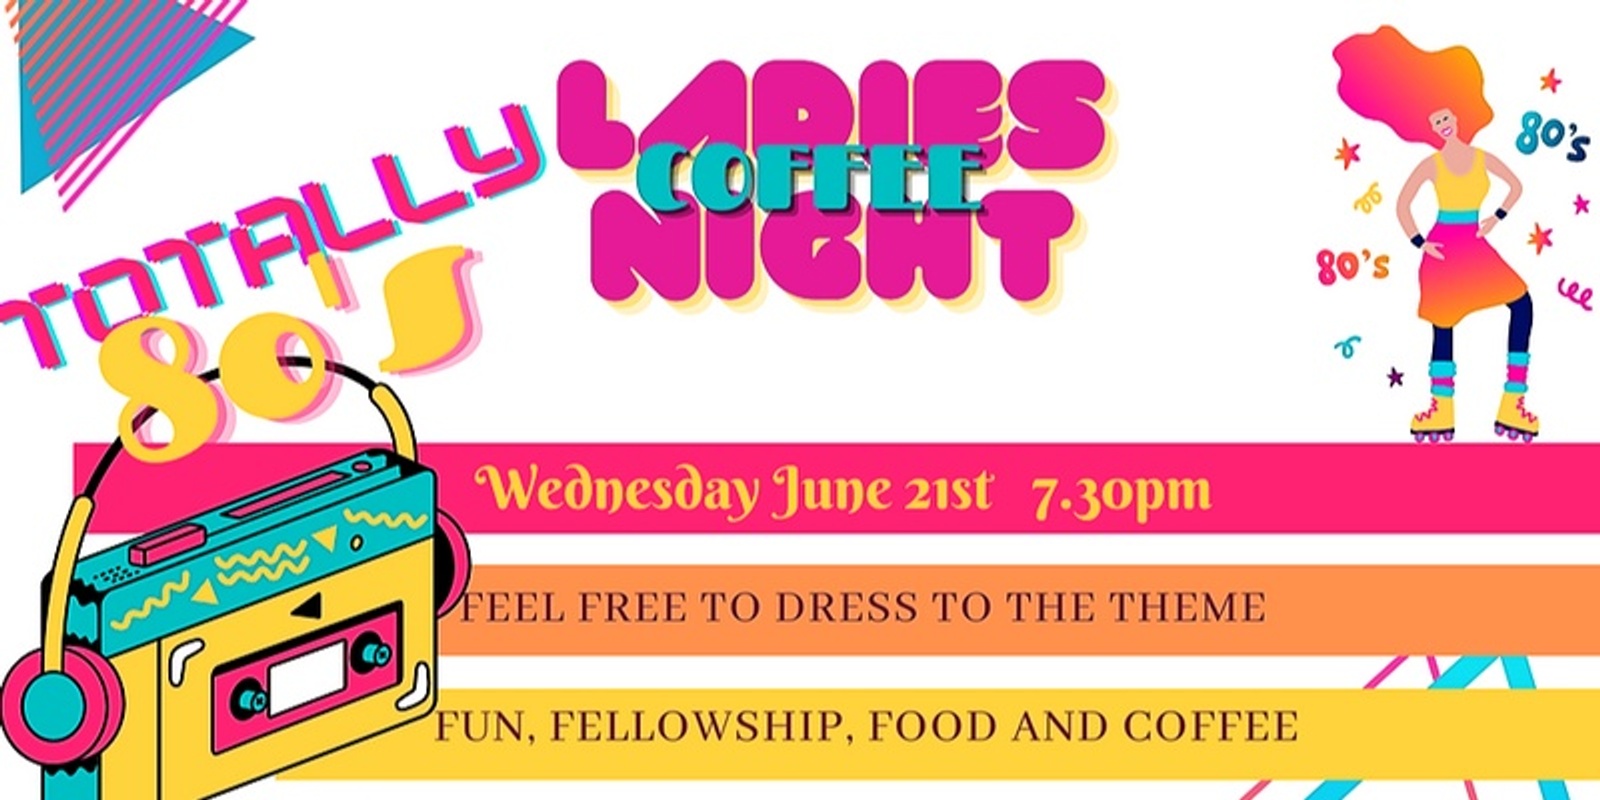 Banner image for Ladies Coffee Night - Totally 80's